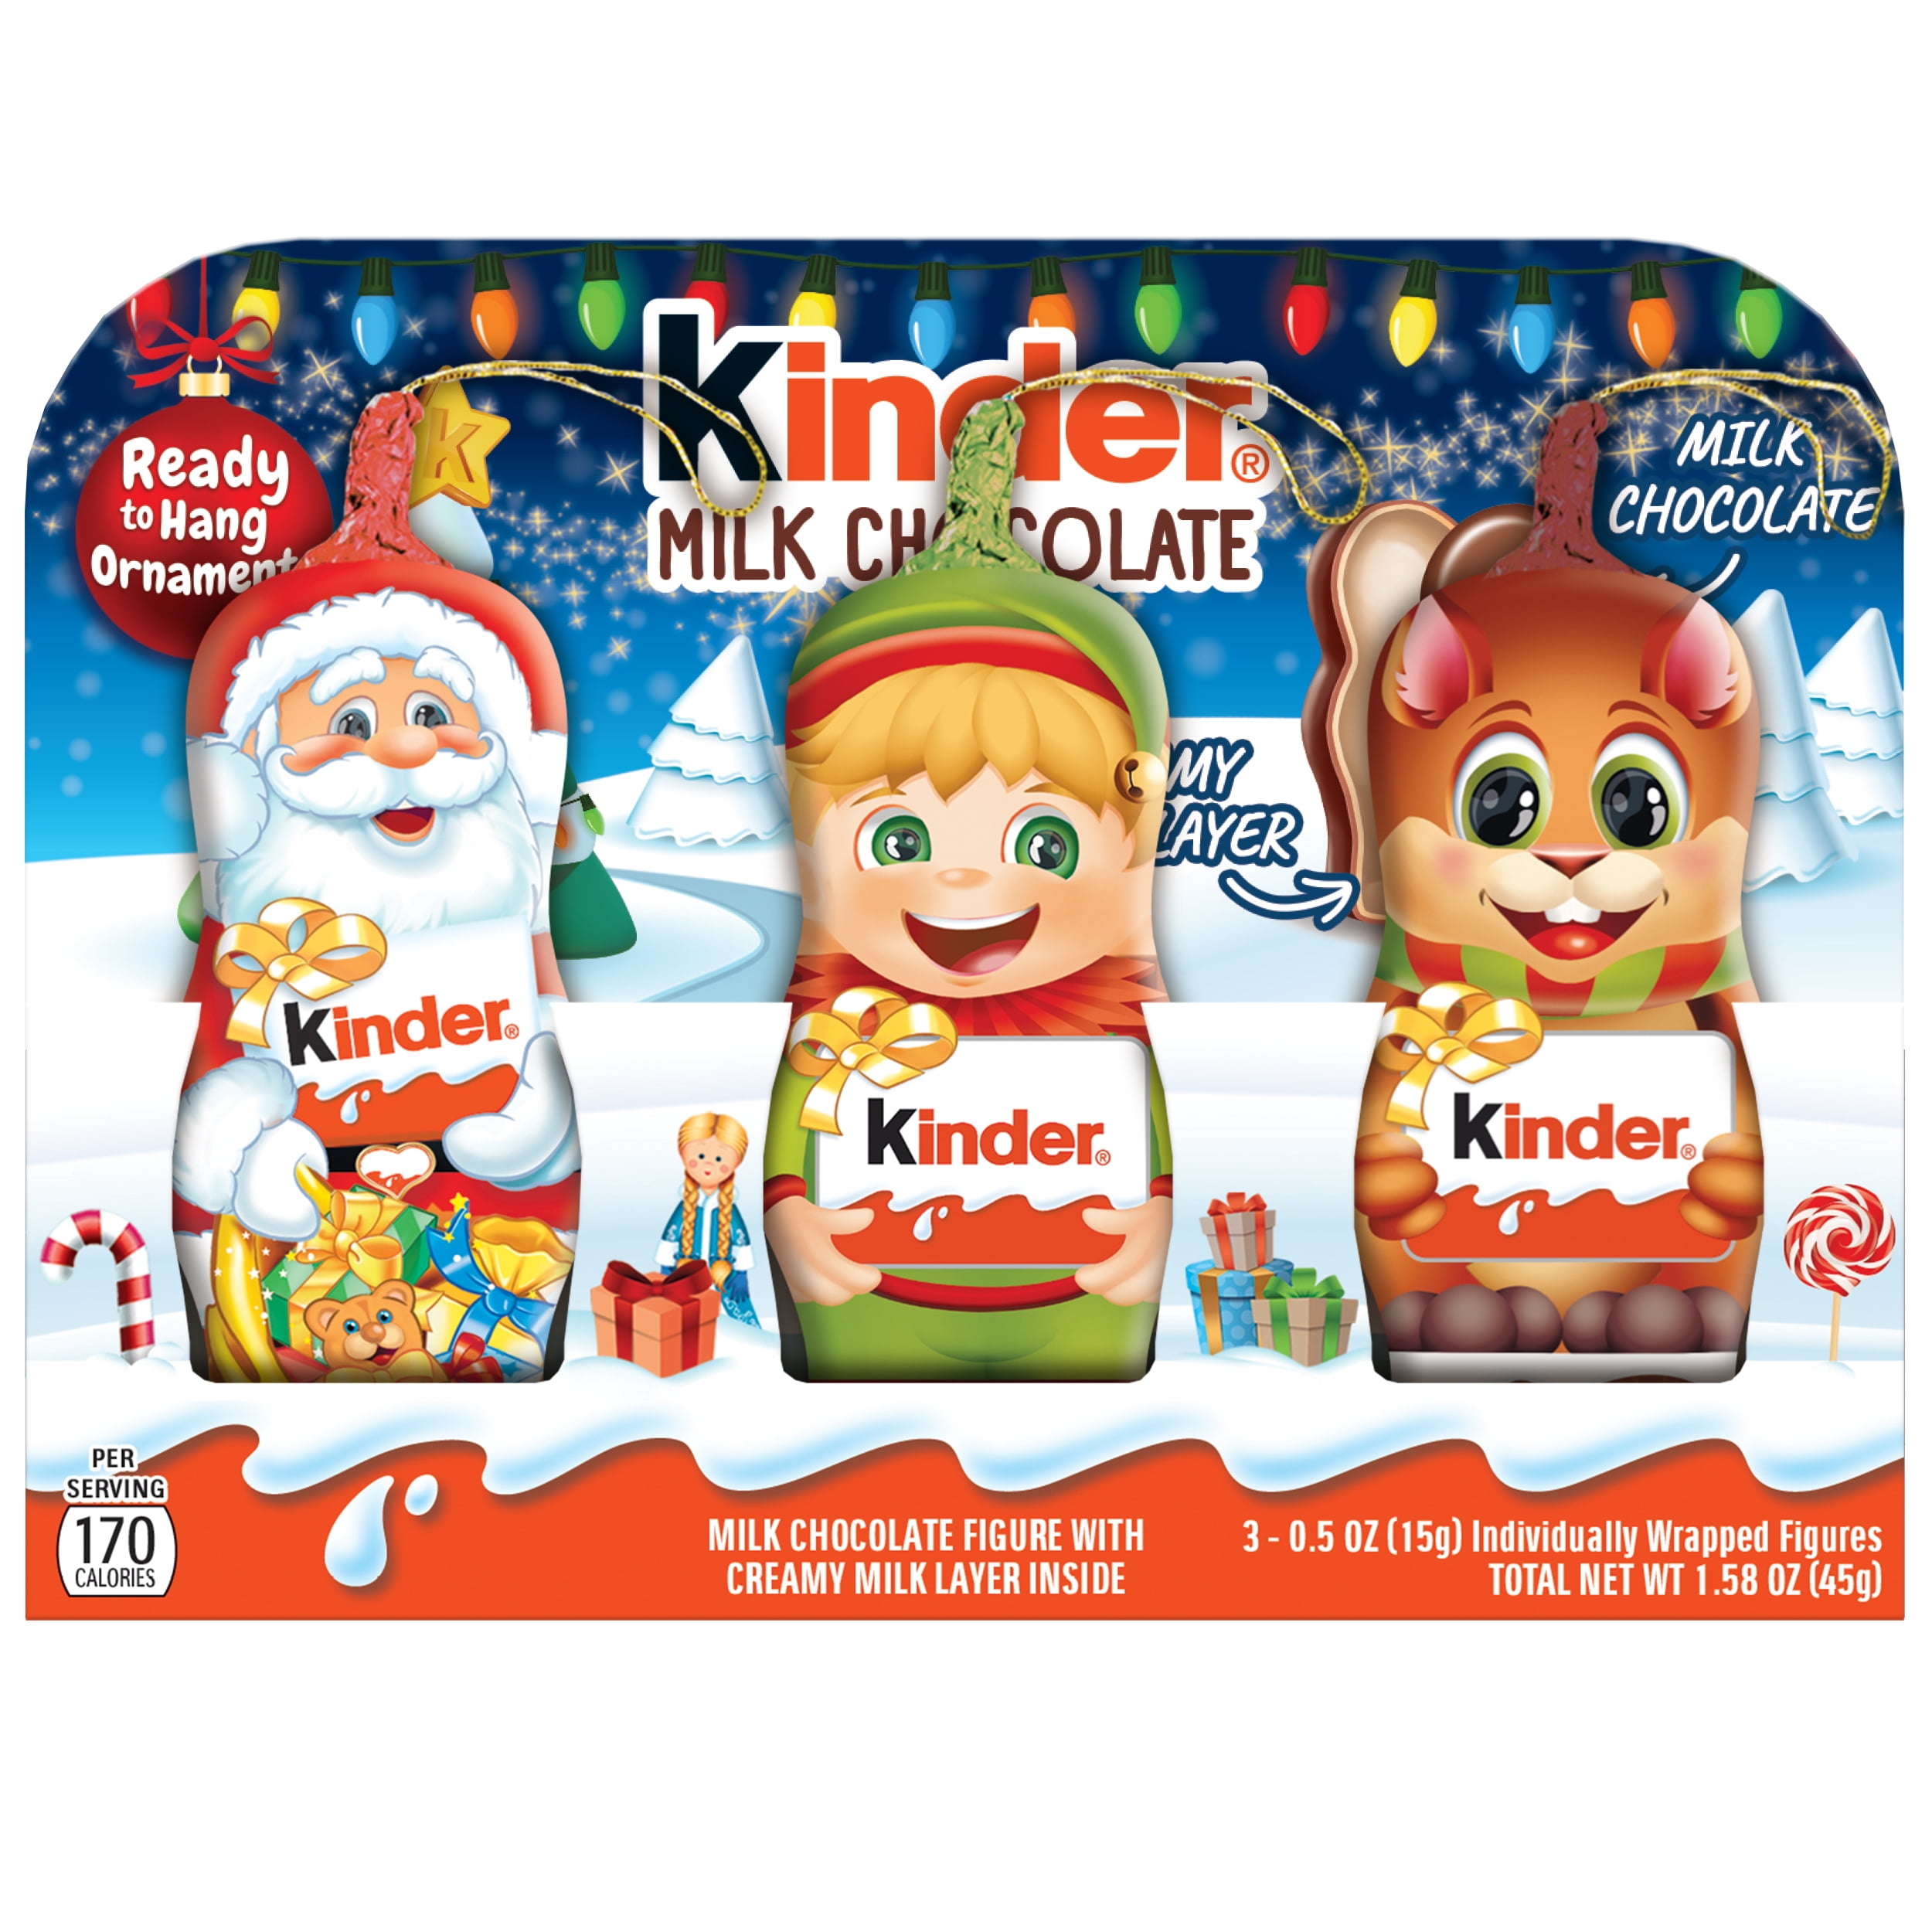 Kinder Milk Chocolate Holiday Mini Hollow Figures, Great for Holiday Stocking Stuffers, 1.58 oz, 3 Count